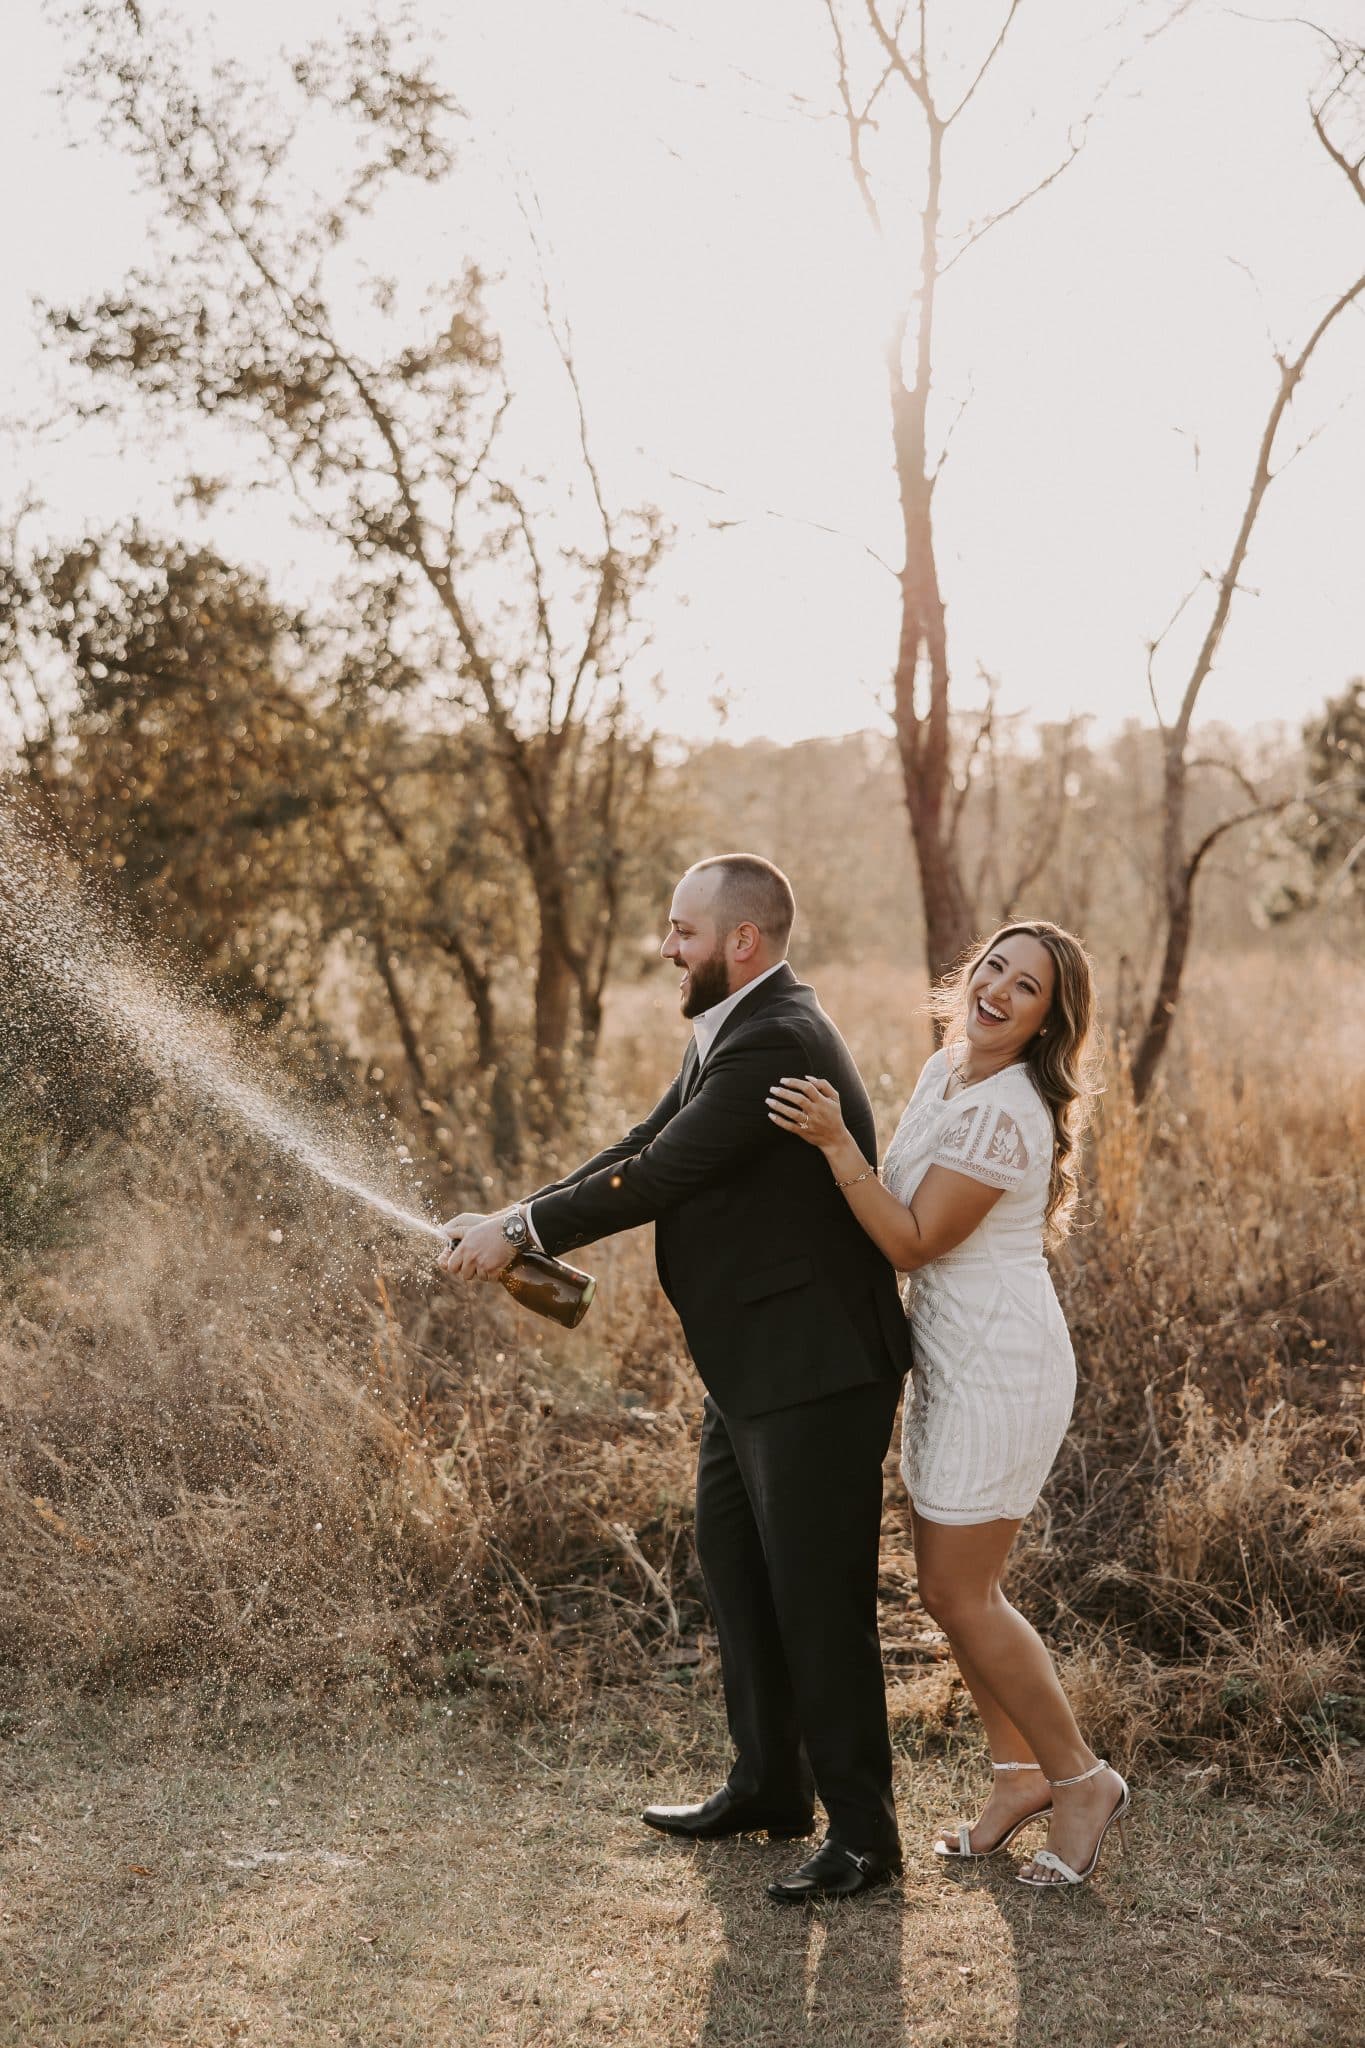 Newly engaged couple laughs together as Christian pops and sprays a bottle of champagne in celebration